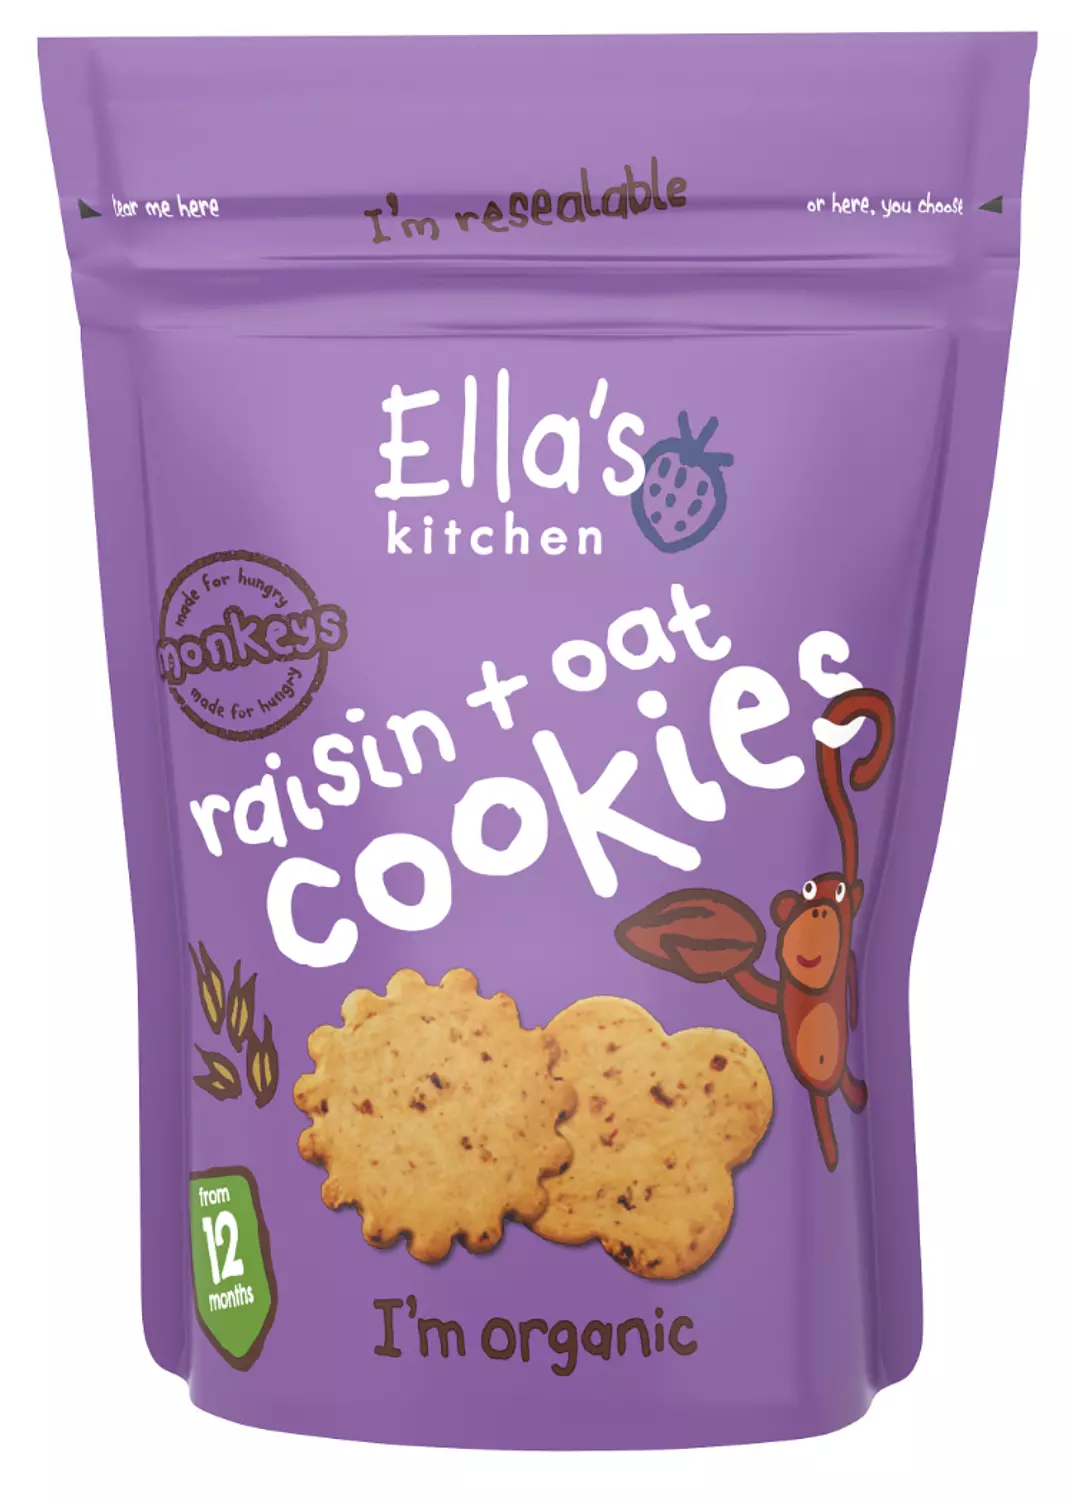 raisin and oat cookies - 80 grams hover image